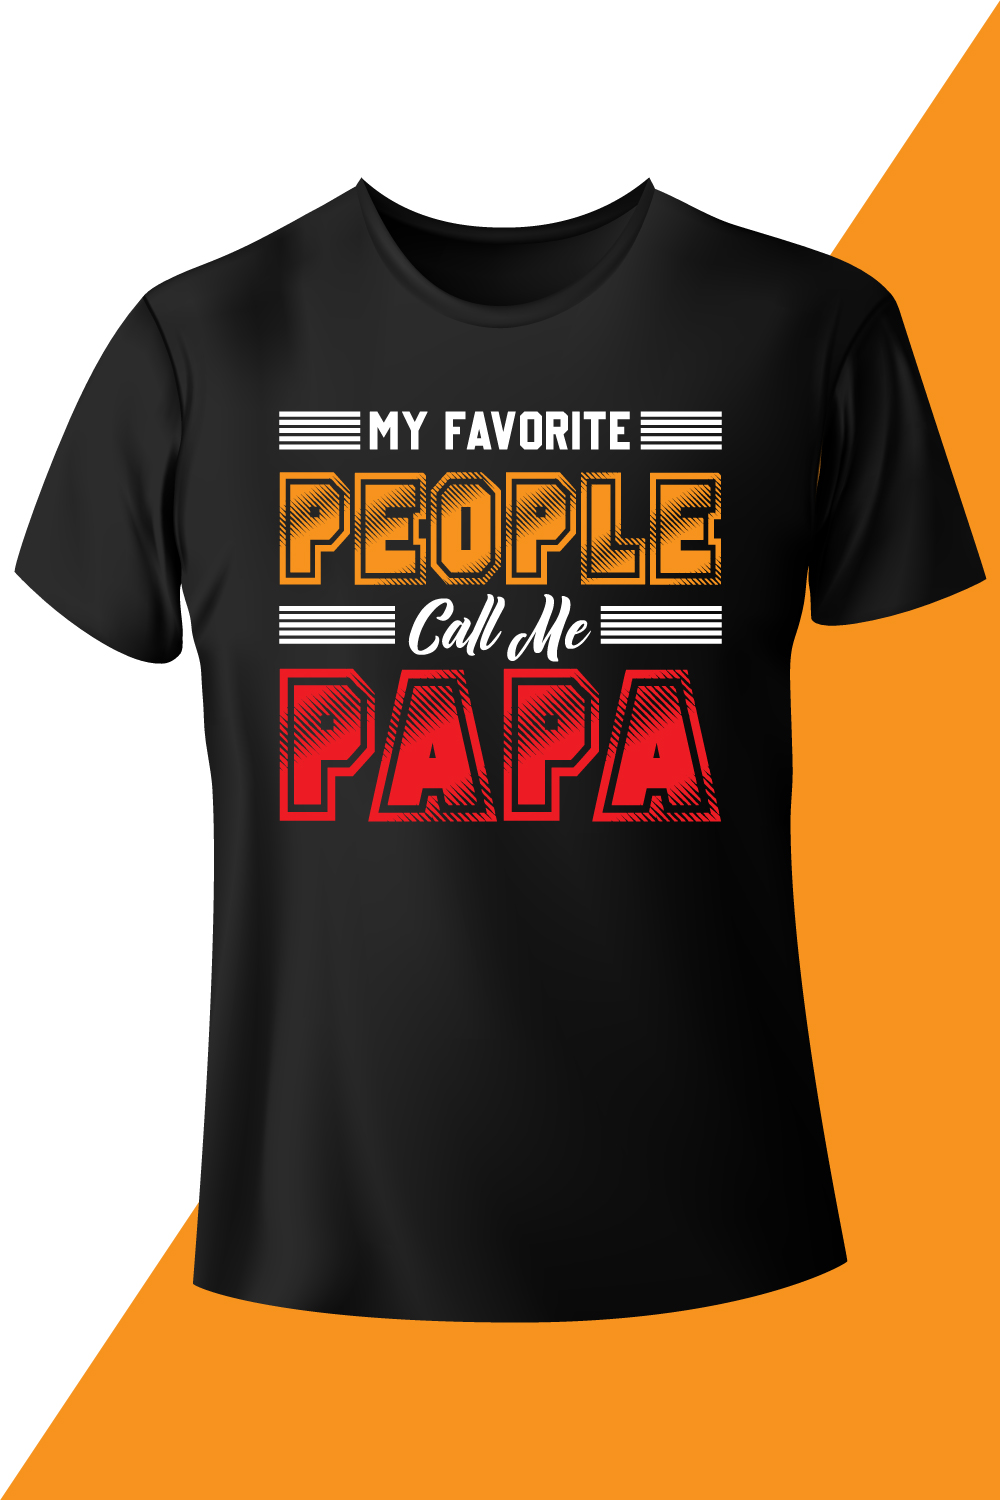 Image of a black t-shirt with an irresistible slogan my favorite people call me papa.